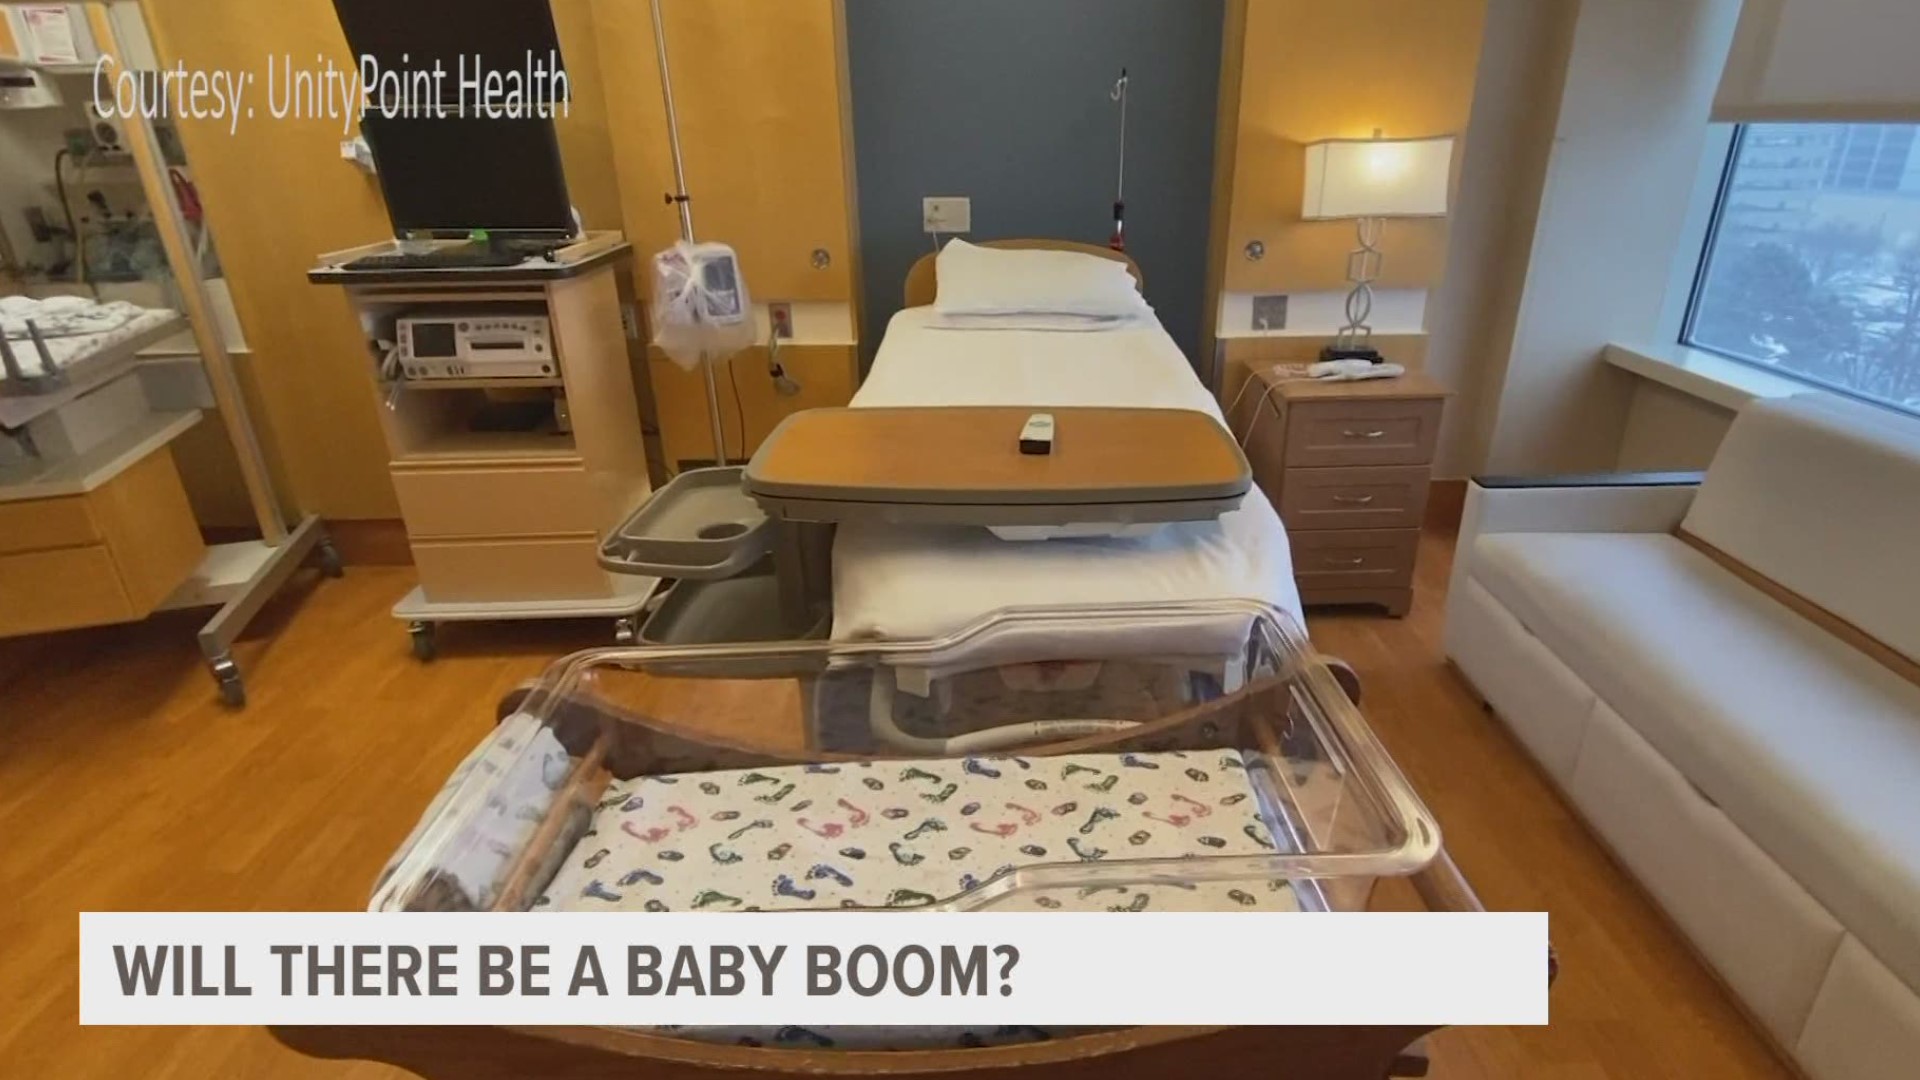 A UnityPoint Health doctor said her division usually births 90 babies per month. But that number could rise to 120 a month in January-March 2021.